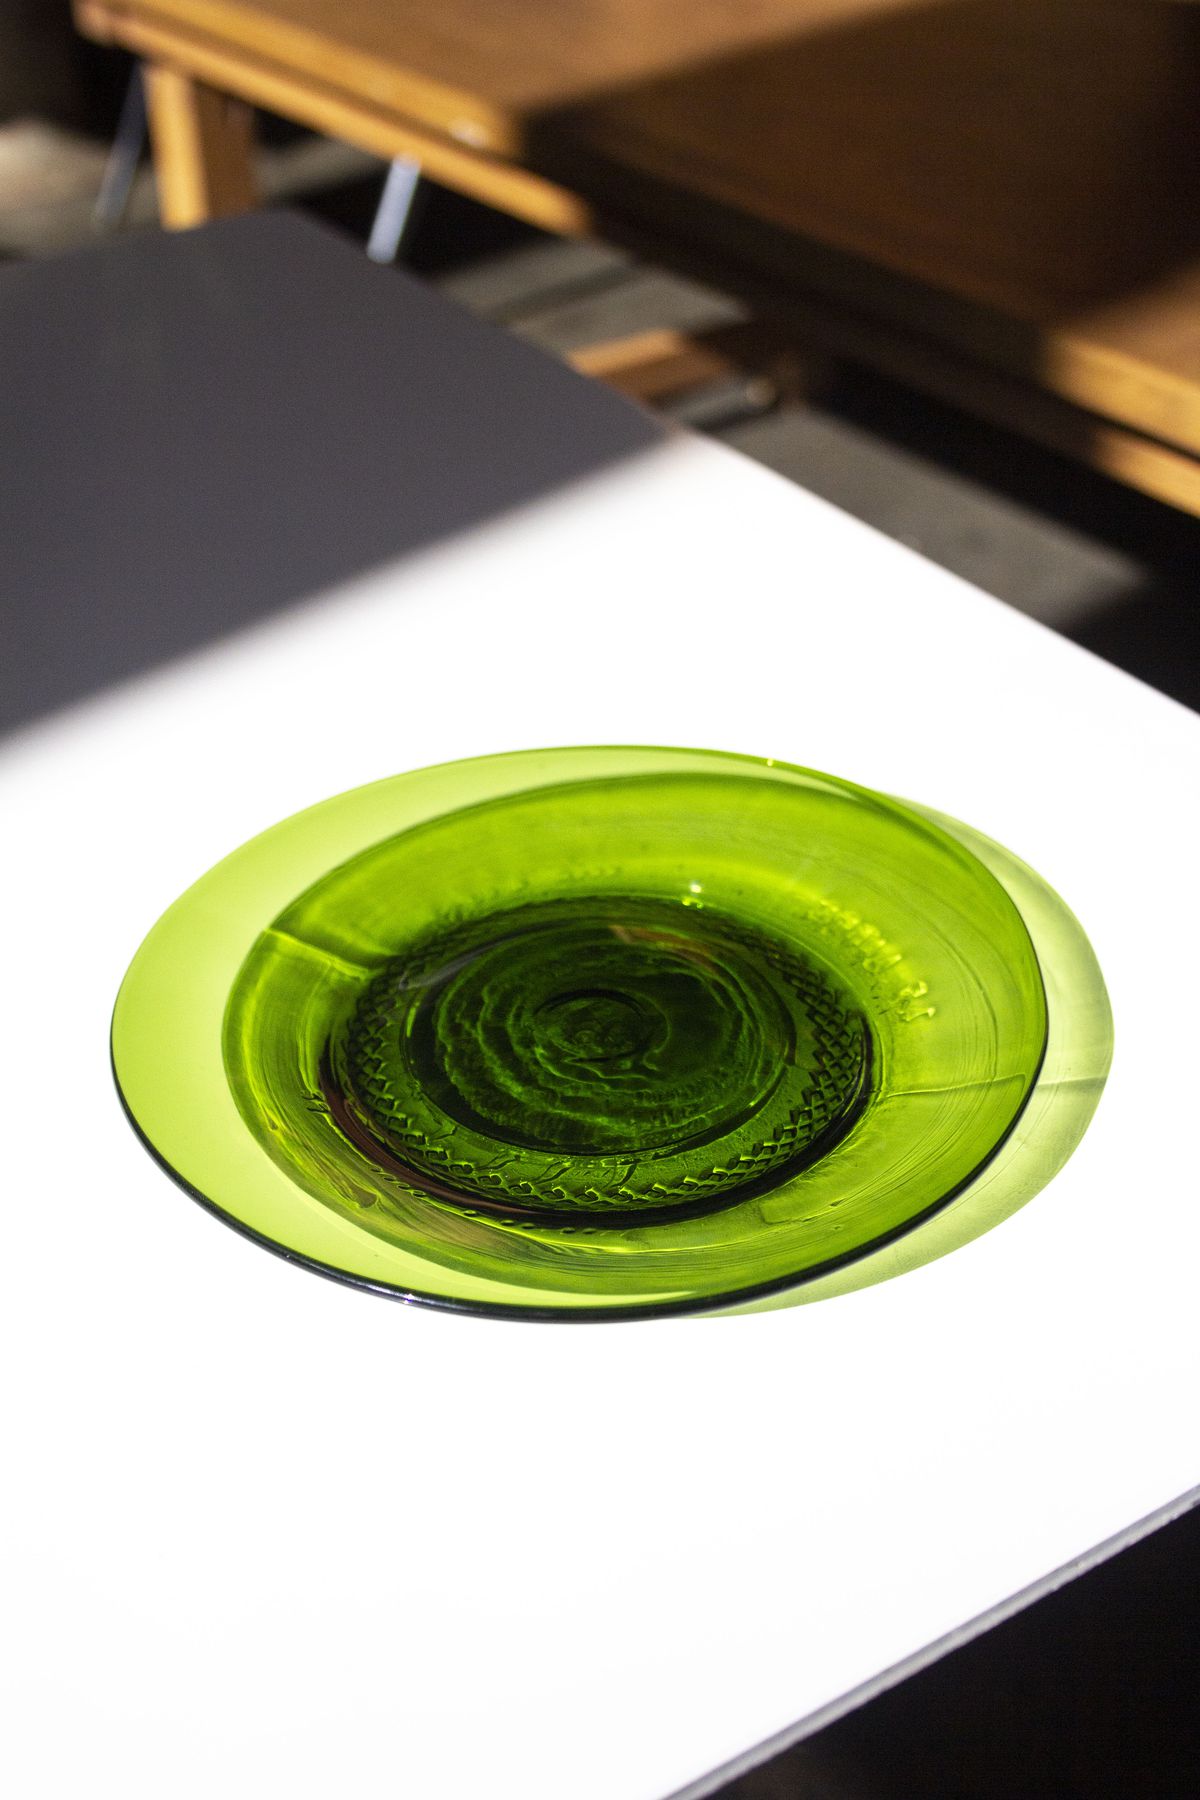 A round green glass sharing plate on a white table.